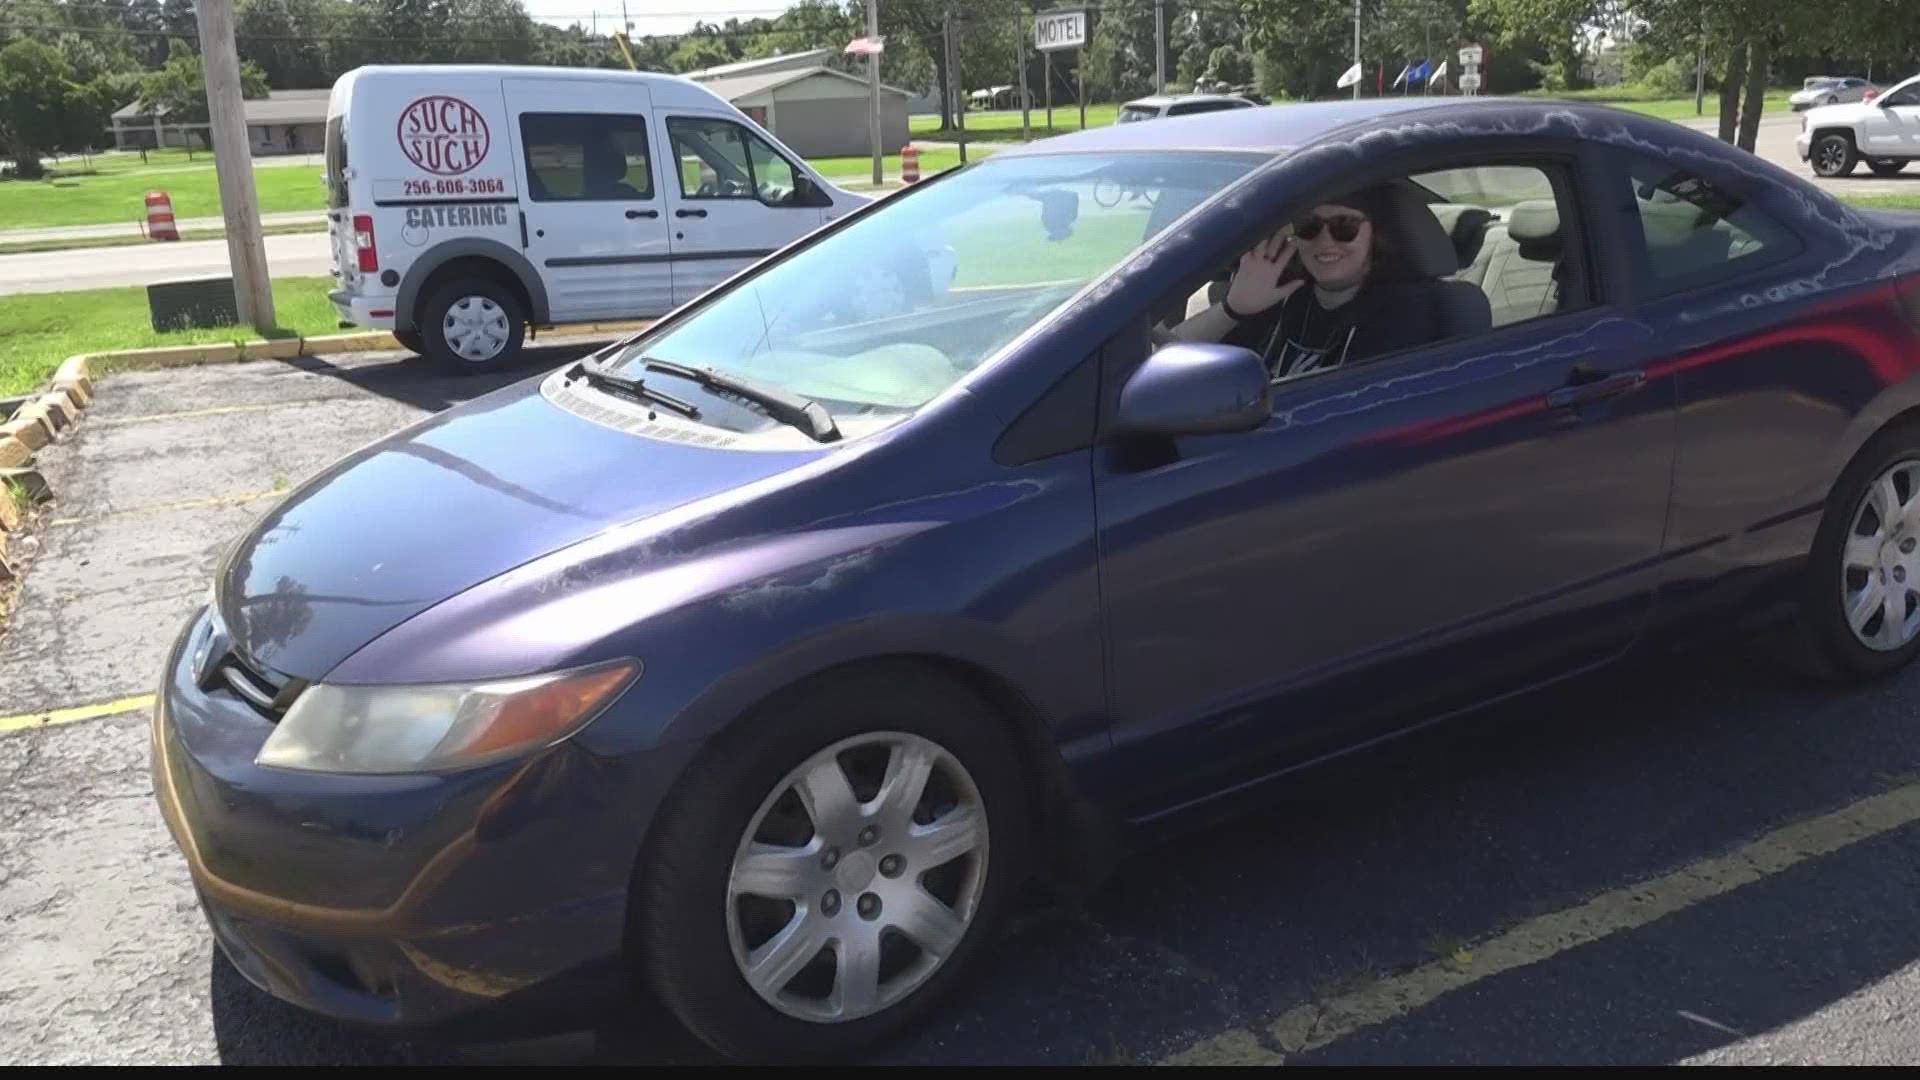 Last year, business owners had to rely on their employees to keep the show going. Now, to show his appreciation, one local business owner gave his employee a car.